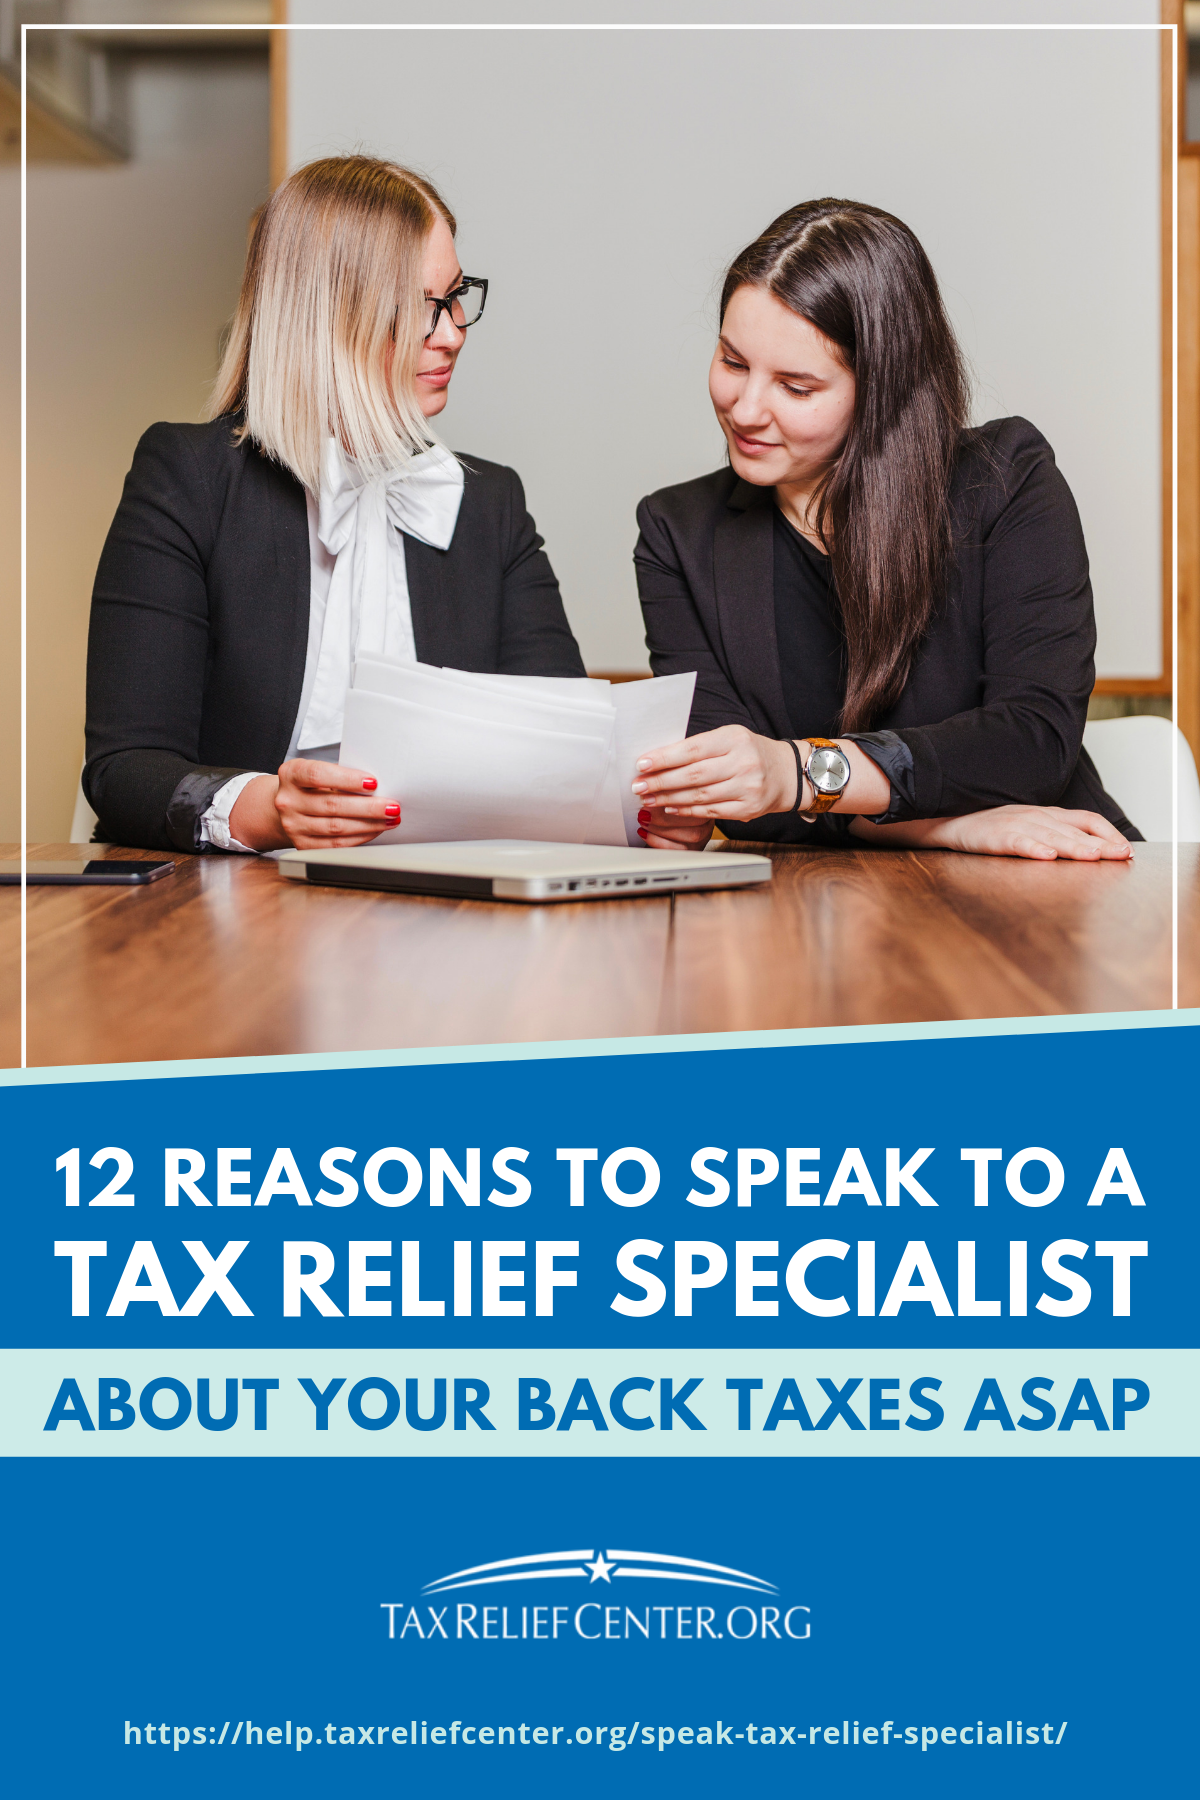 12 Reasons To Speak To A Tax Relief Specialist About Your Back Taxes ASAP https://help.taxreliefcenter.org/speak-tax-relief-specialist/